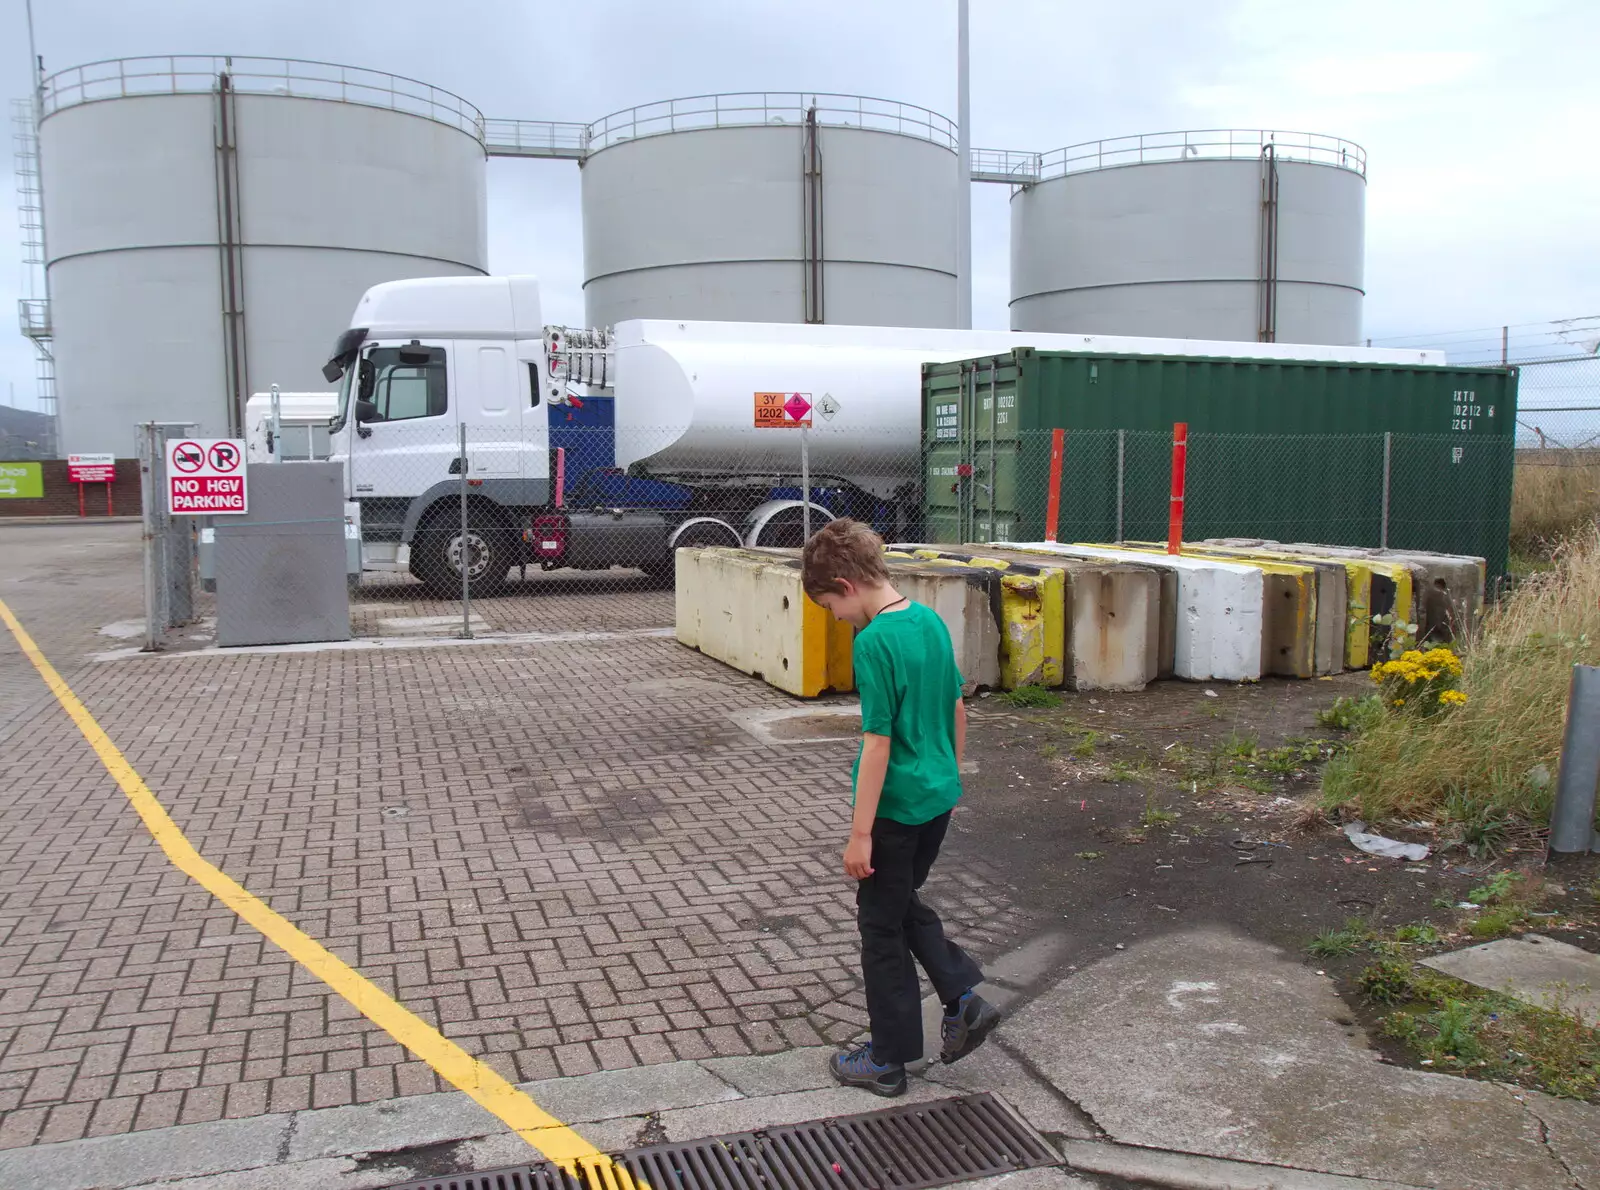 Fred roams around near some oil tanks, from The Summer Trip to Ireland, Monkstown, Co. Dublin, Ireland - 9th August 2019